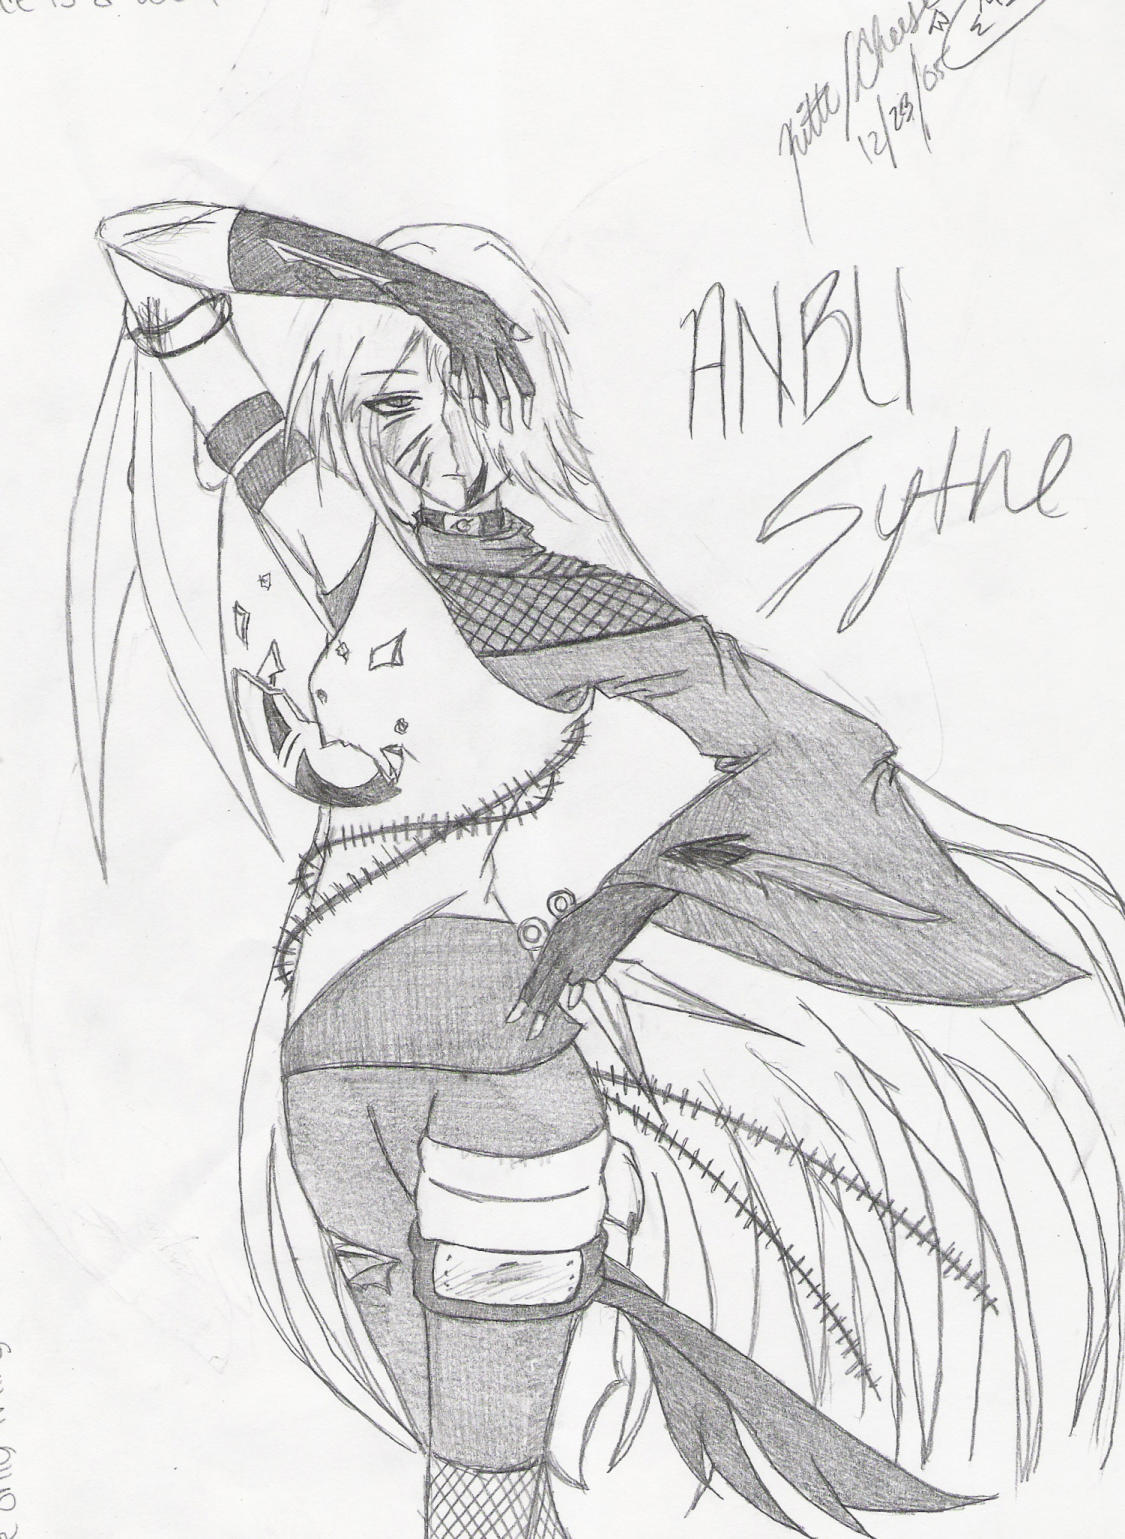 ~*ANBU Sythe*~ by kitti_is_my_name